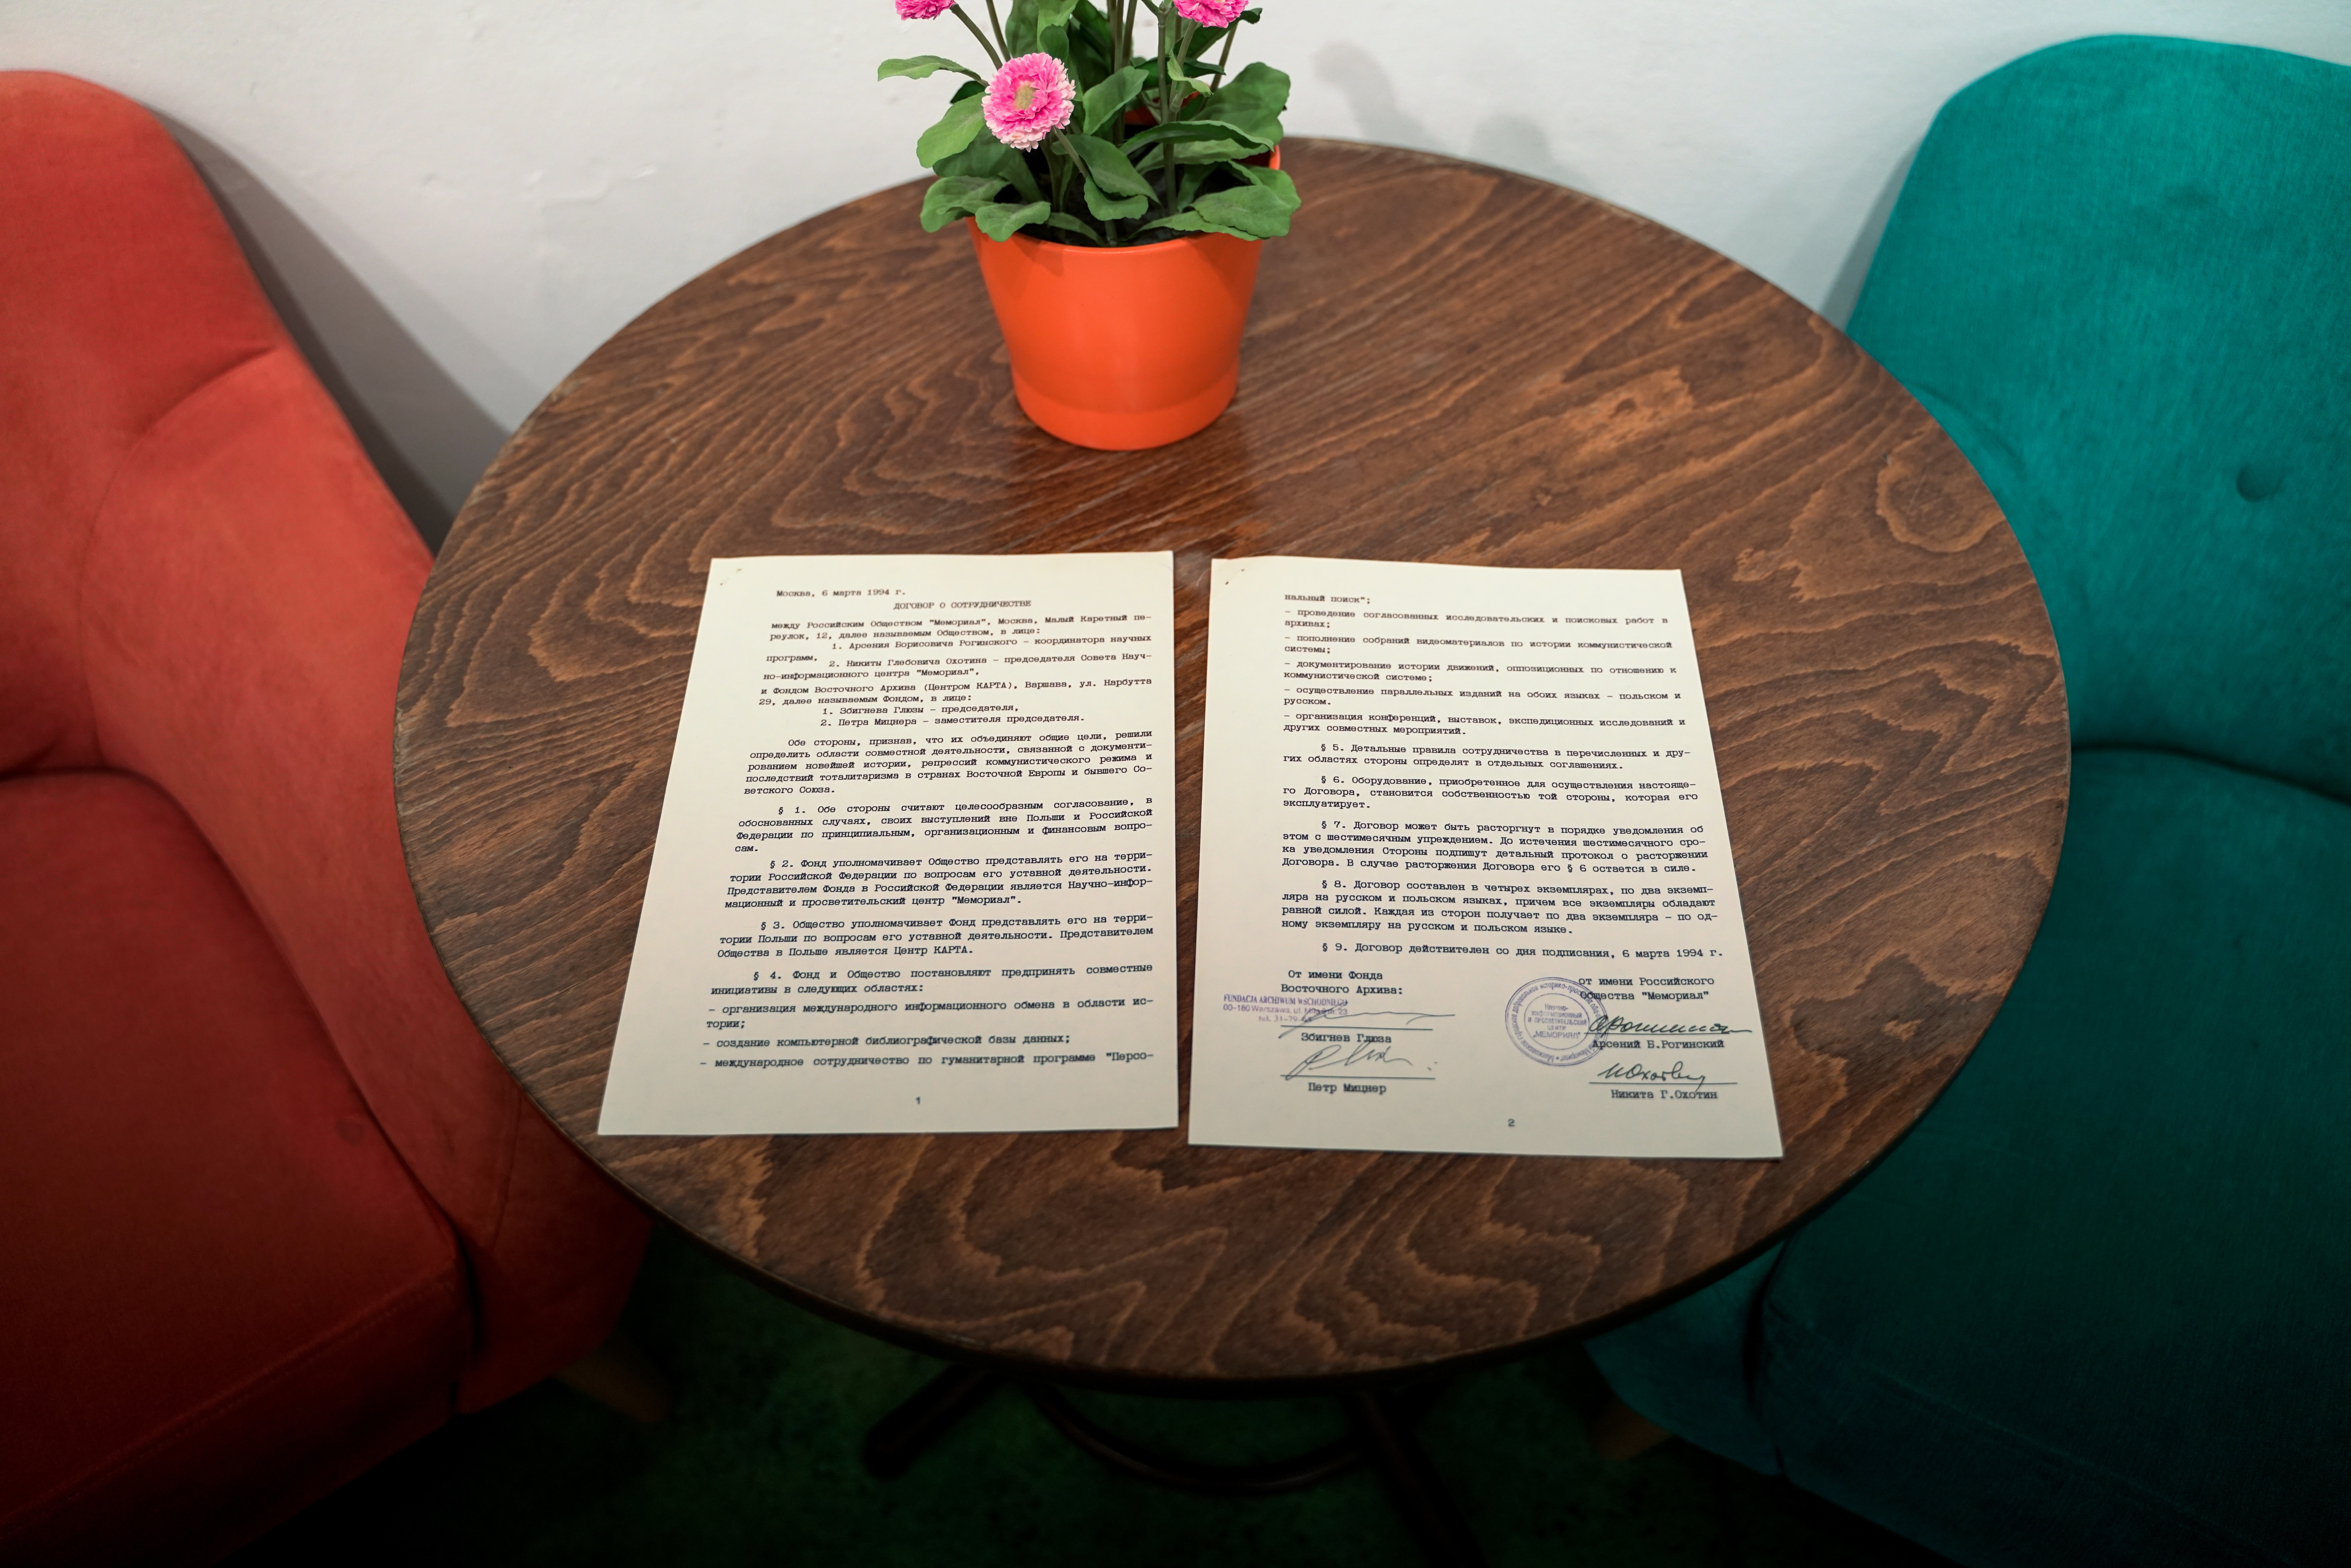 An agreement between rights group Memorial and nongovernmental organization KARTA.